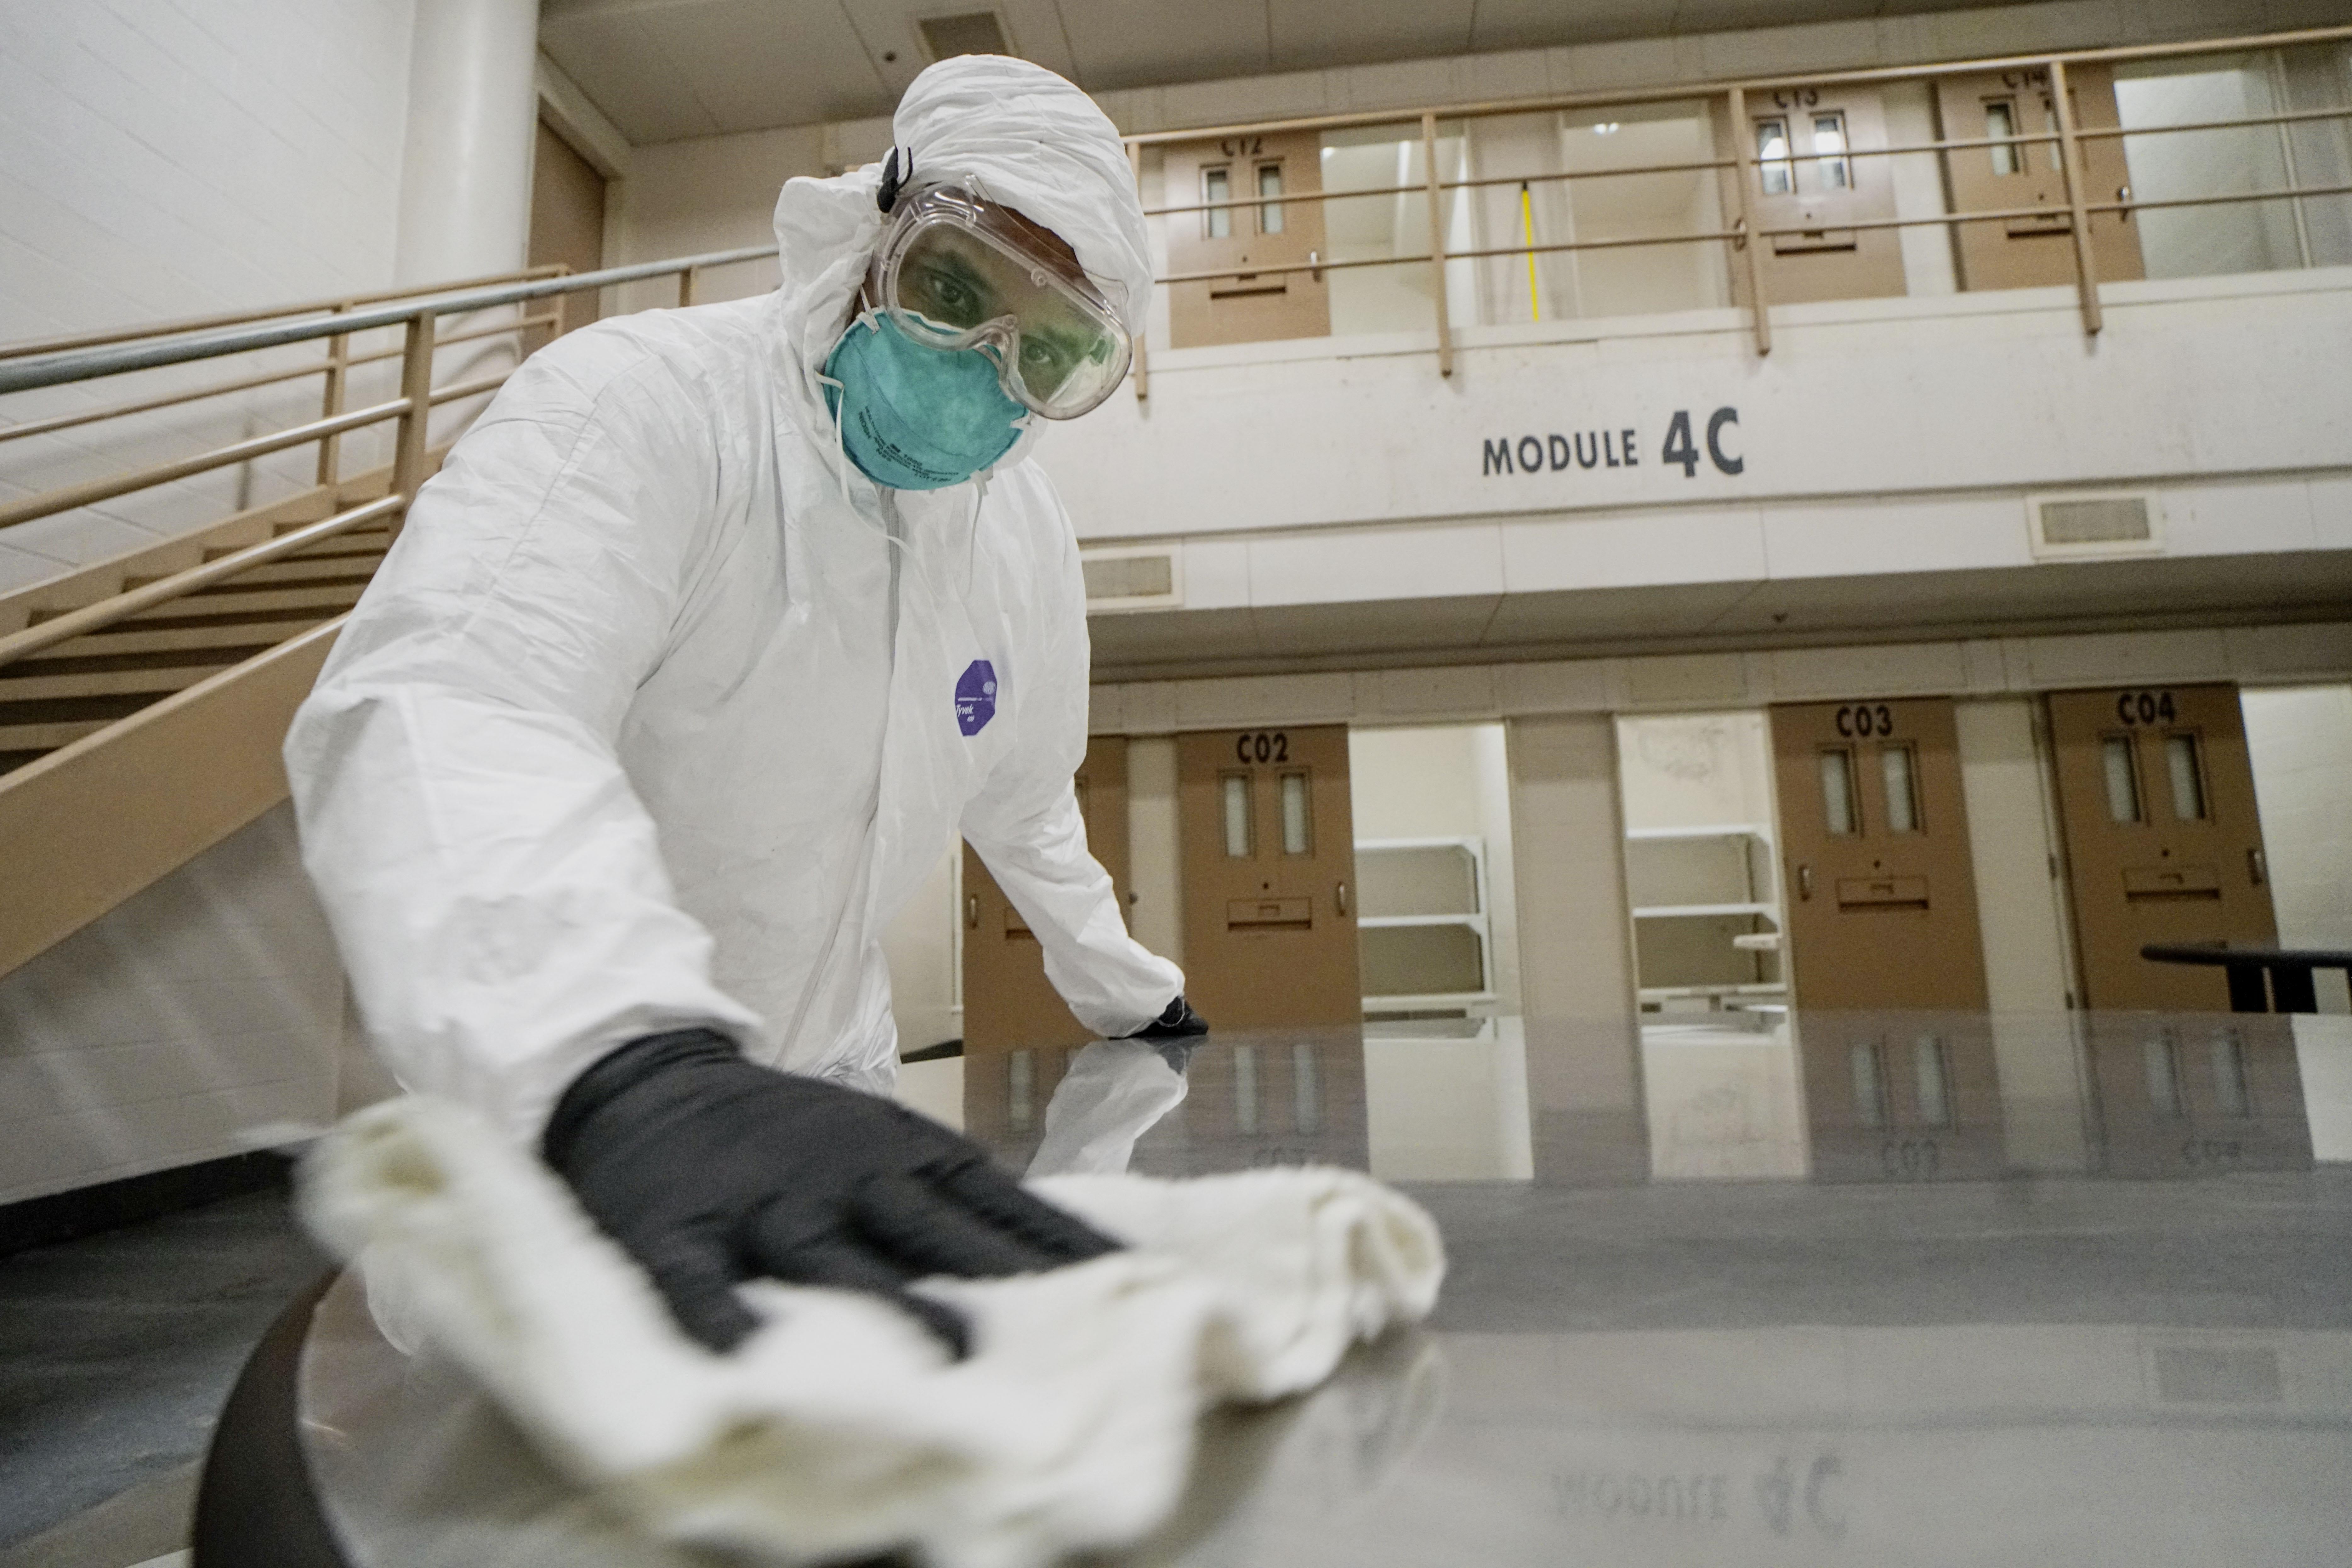 A man in a protective suit, goggles and mask scrubs the floor of a jail.